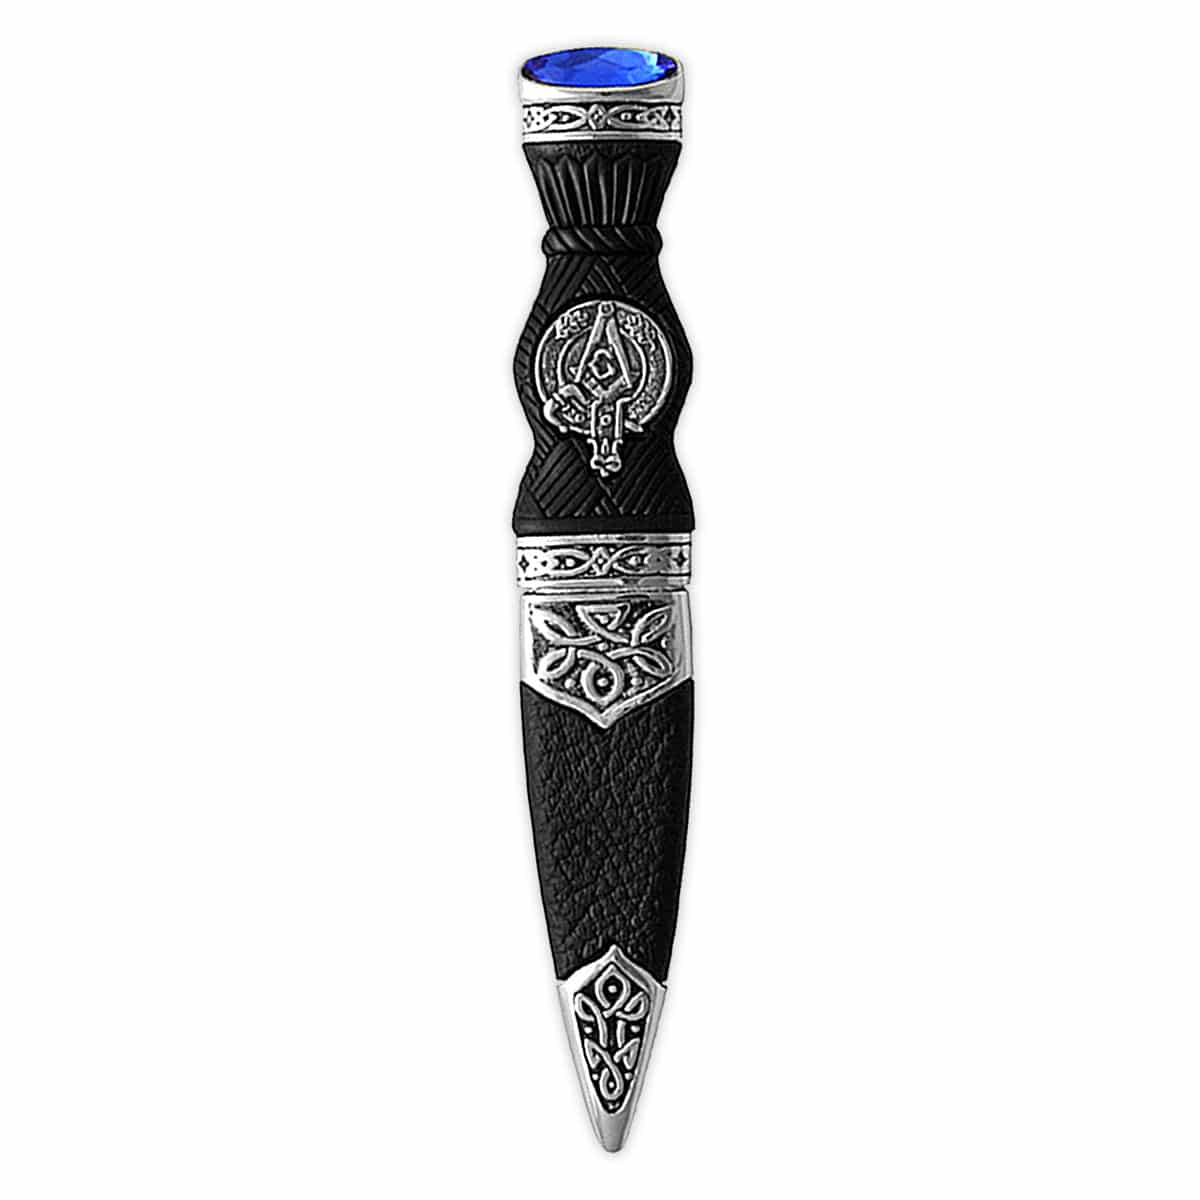 An ornate Pewter Celtic Knot Clan Crest sgian dubh.